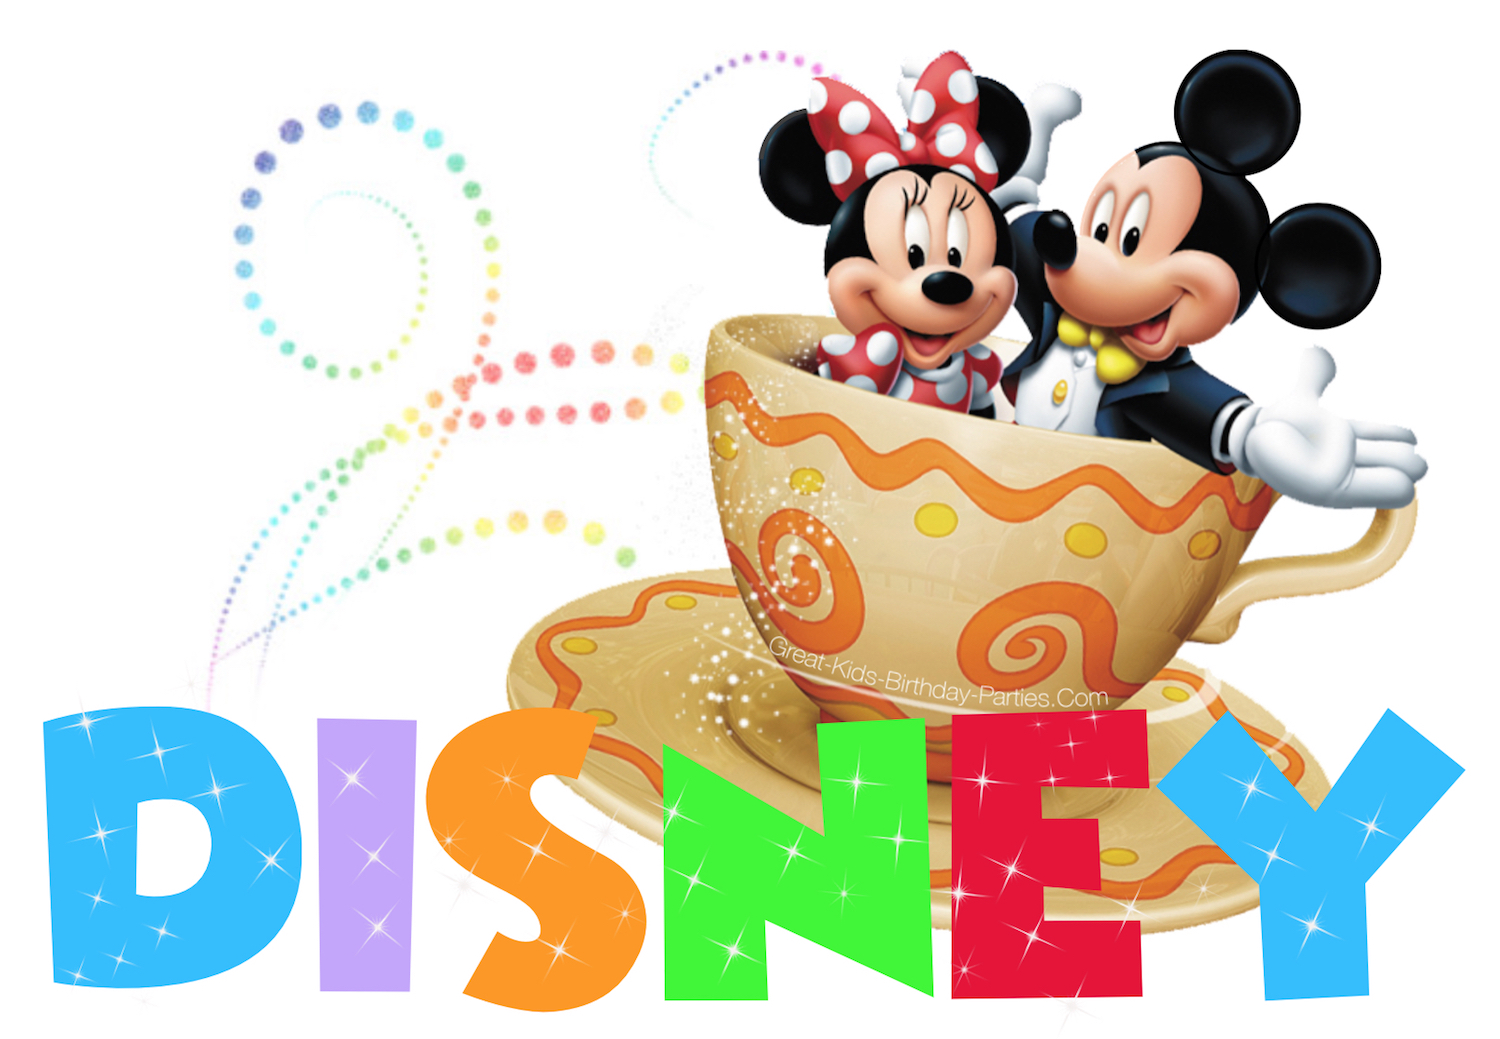 Lots of free Disney fonts, great for Mickey invitations, Minnie invitations, Mickey printables, Minnie printables, Disney scrapbooking and lots more.